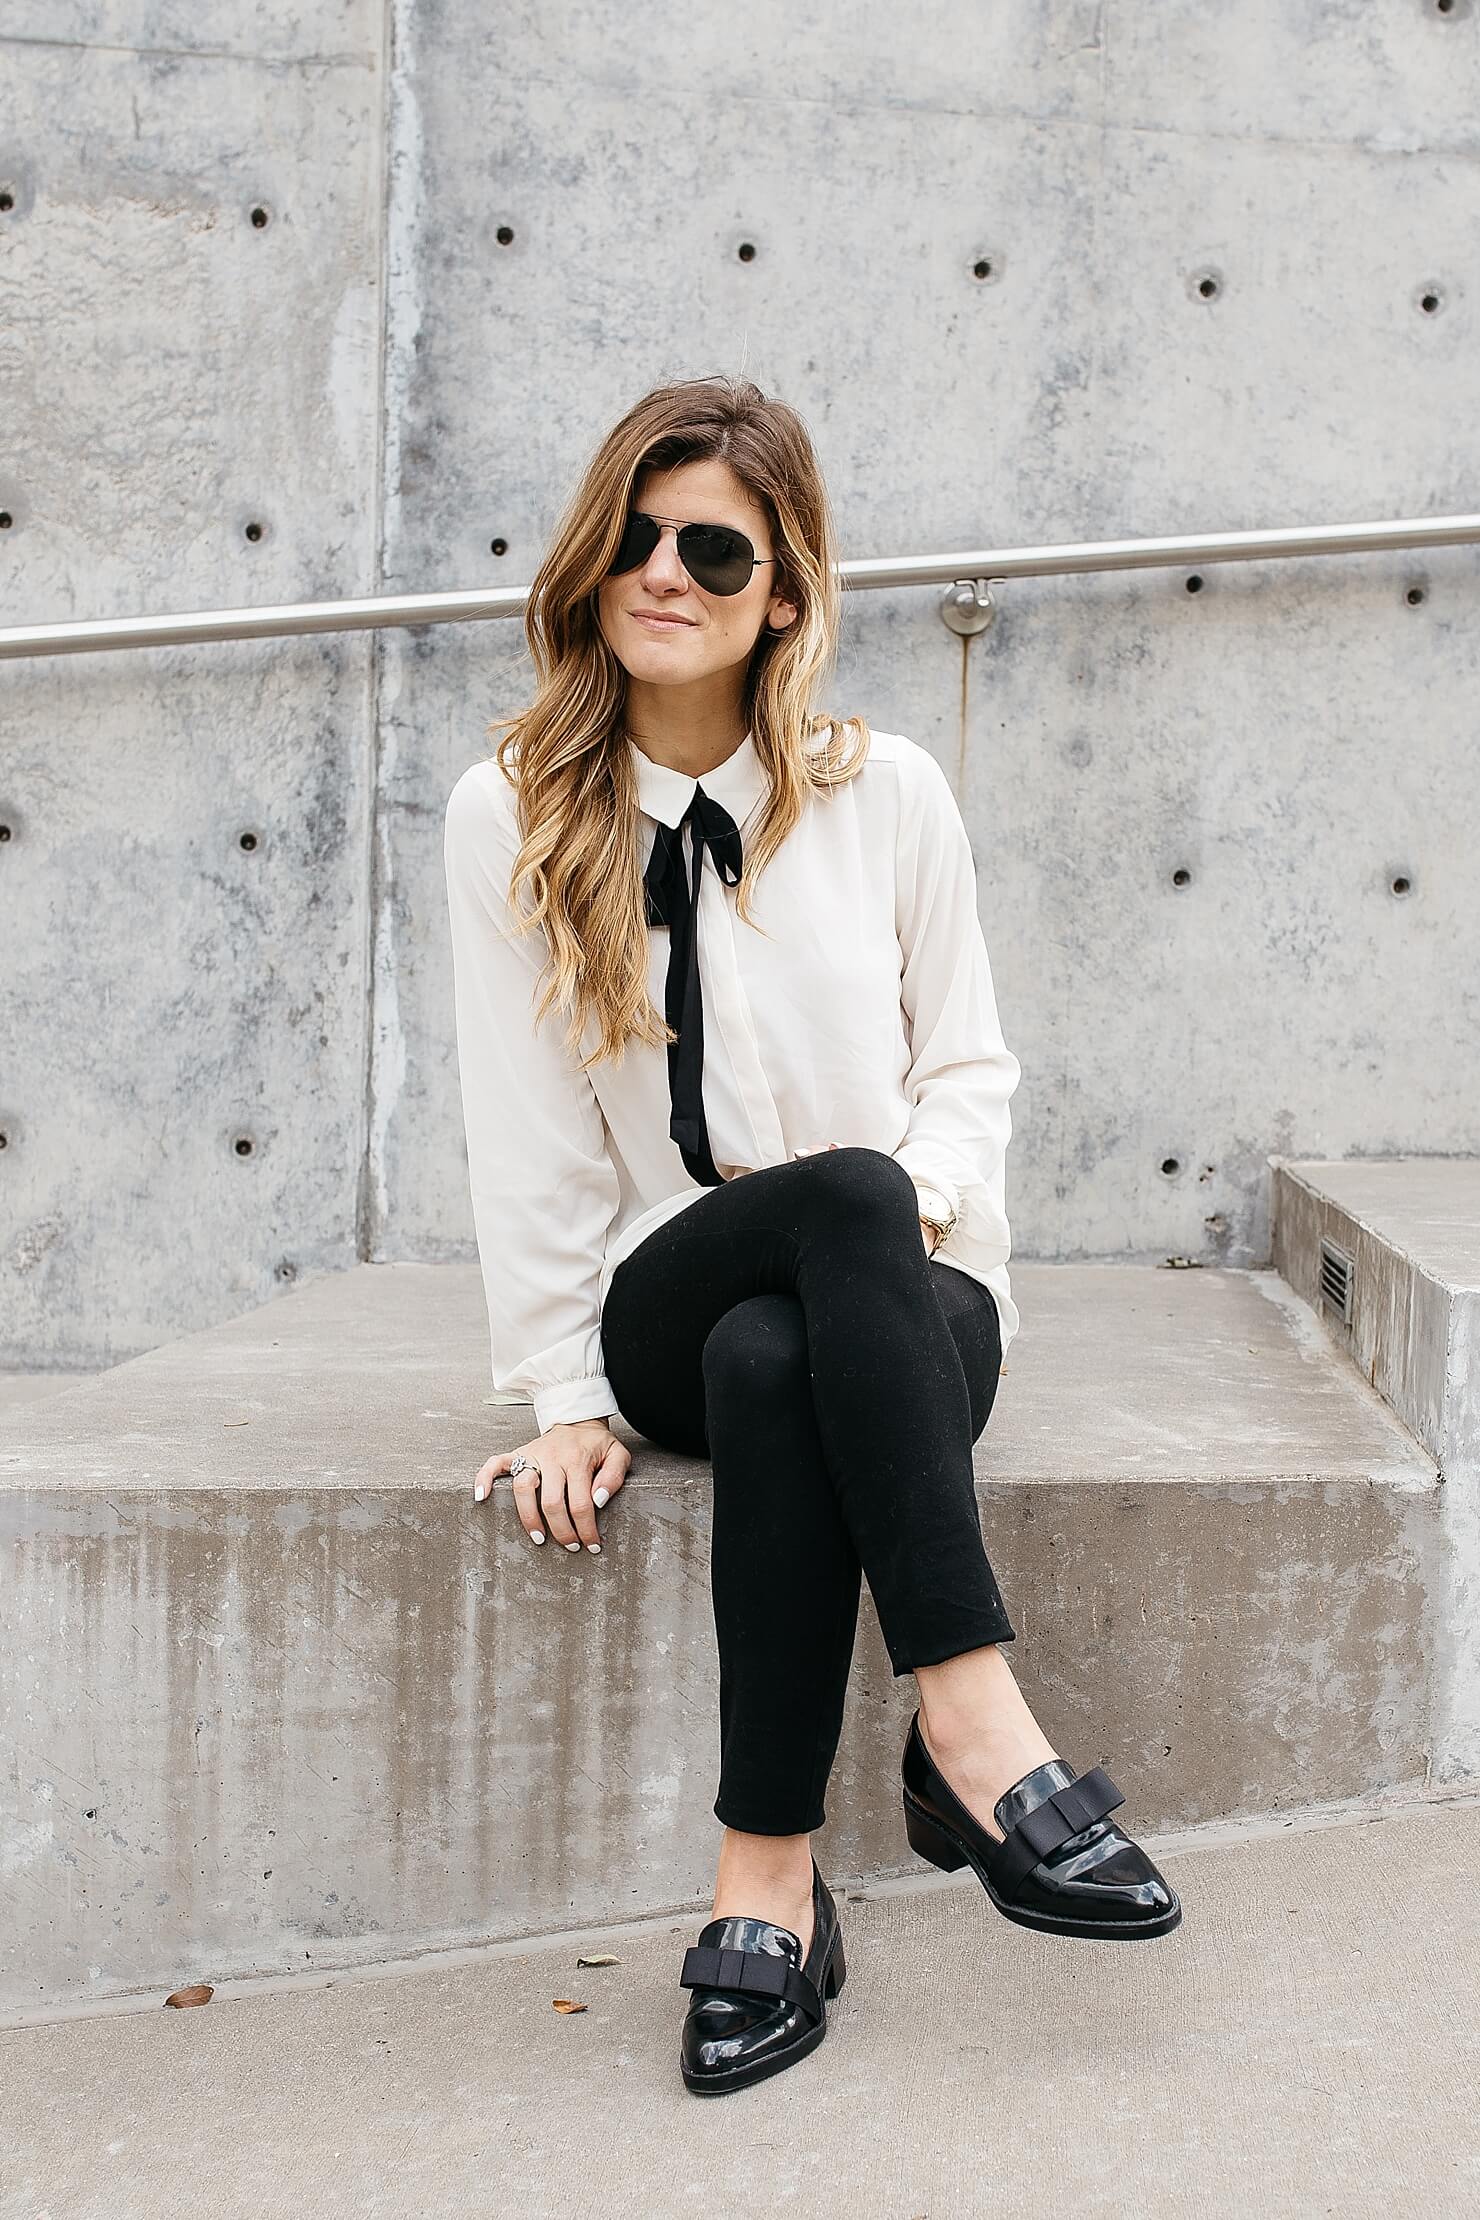 Fall Business Casual Outfit Chic Black & White Look for Work